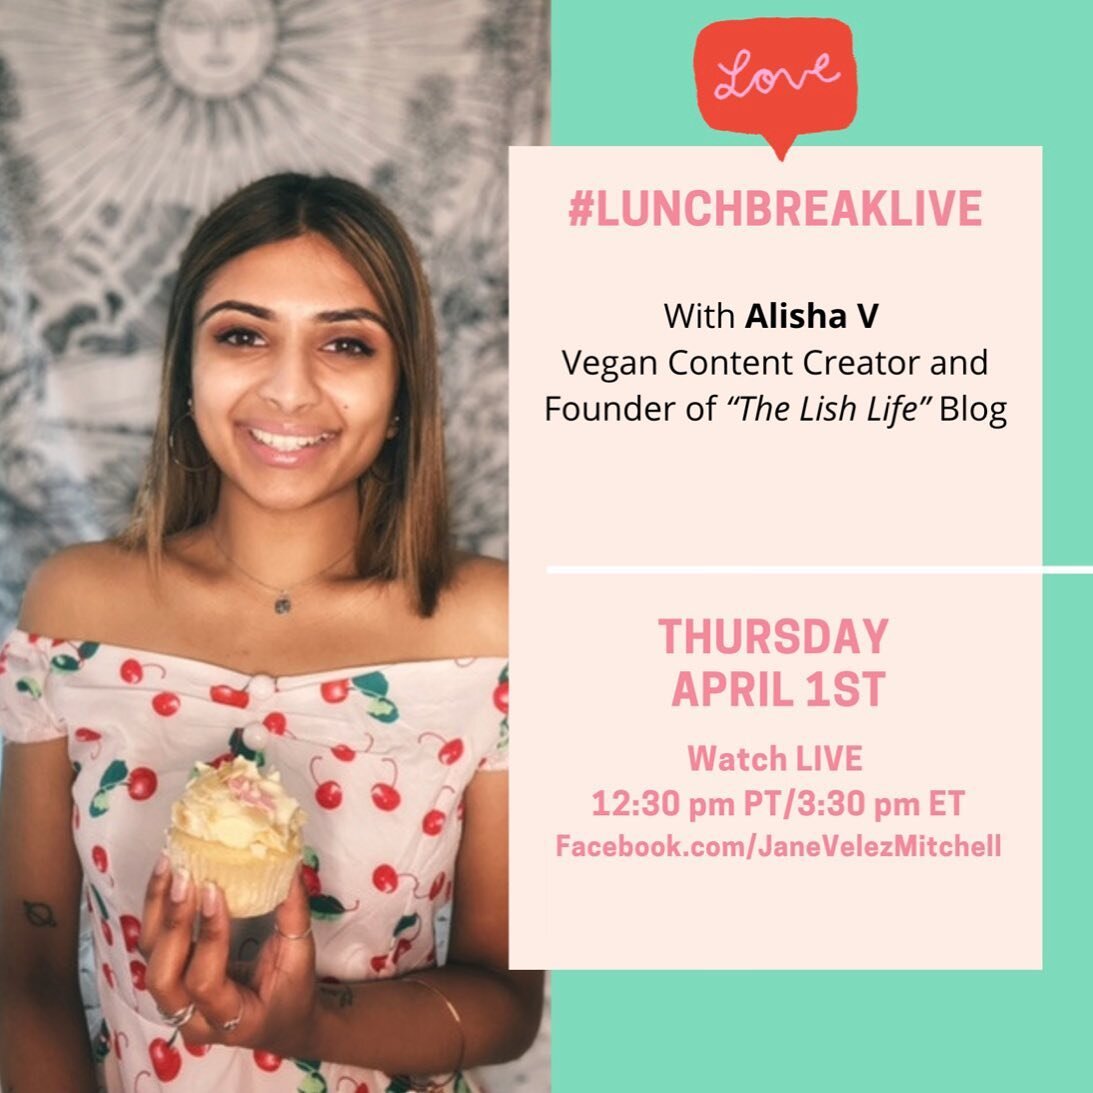 I&rsquo;m going LIVE today on @janeunchainednews for LunchBreakLIVE! Tune in to their FB livestream at 12:30 PT/3:30 ET to cook with me 👩&zwj;🍳 I&rsquo;ll be making #vegan, #glutenfree, &amp; chickpea-free air fryer pakoras. 😄 You don&rsquo;t wann